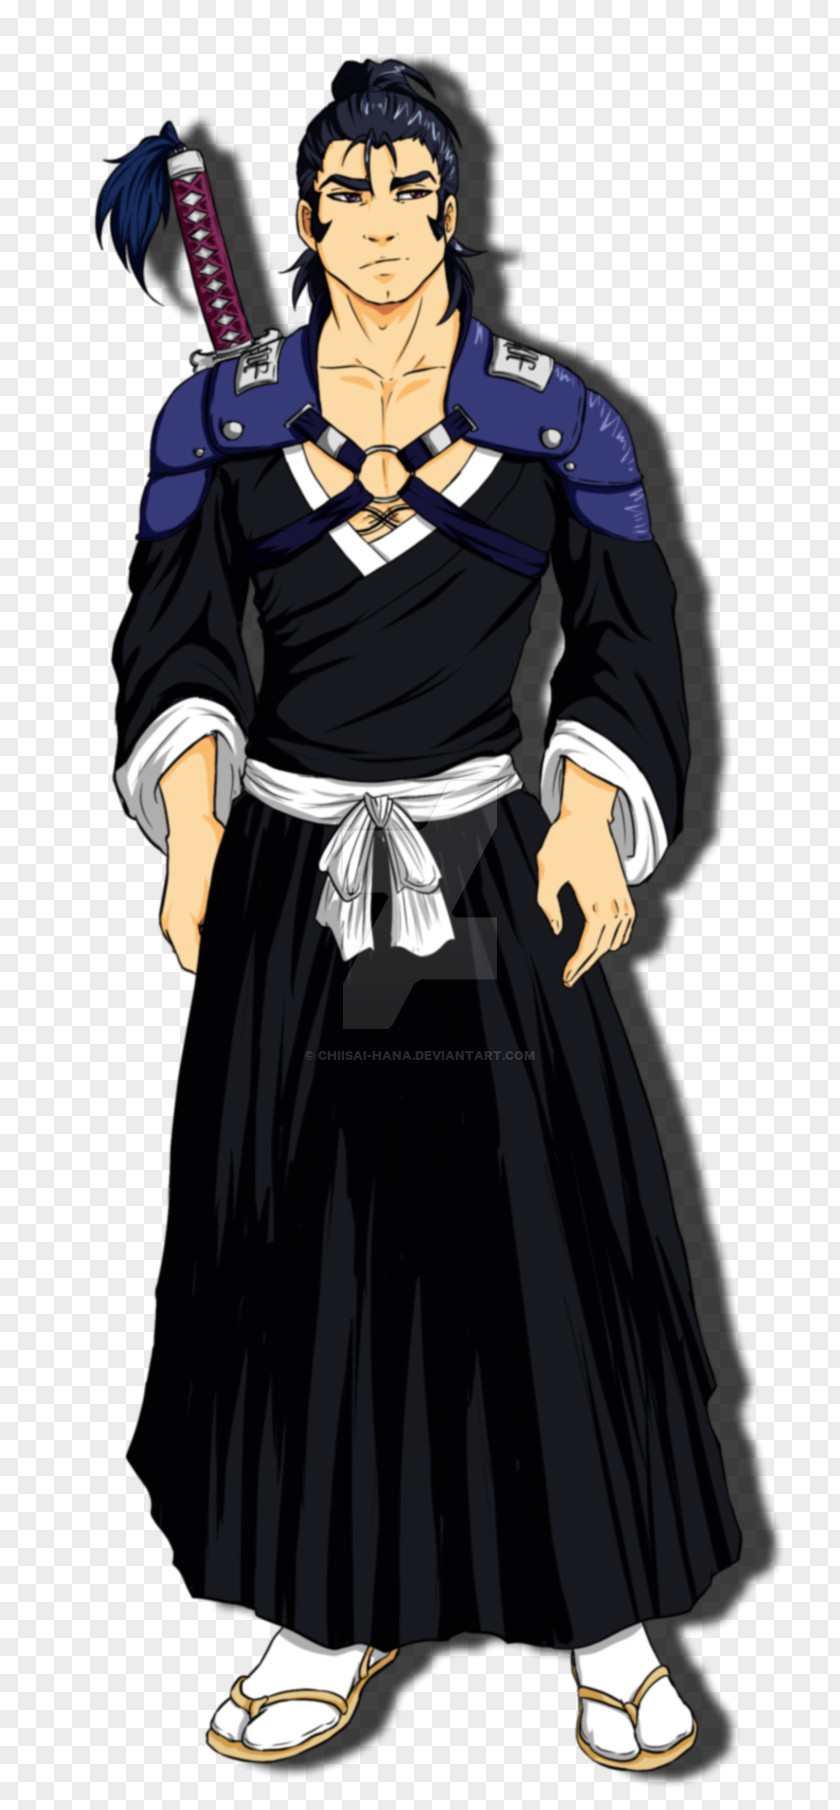 Bleach Clothing Costume Design Uniform Character PNG